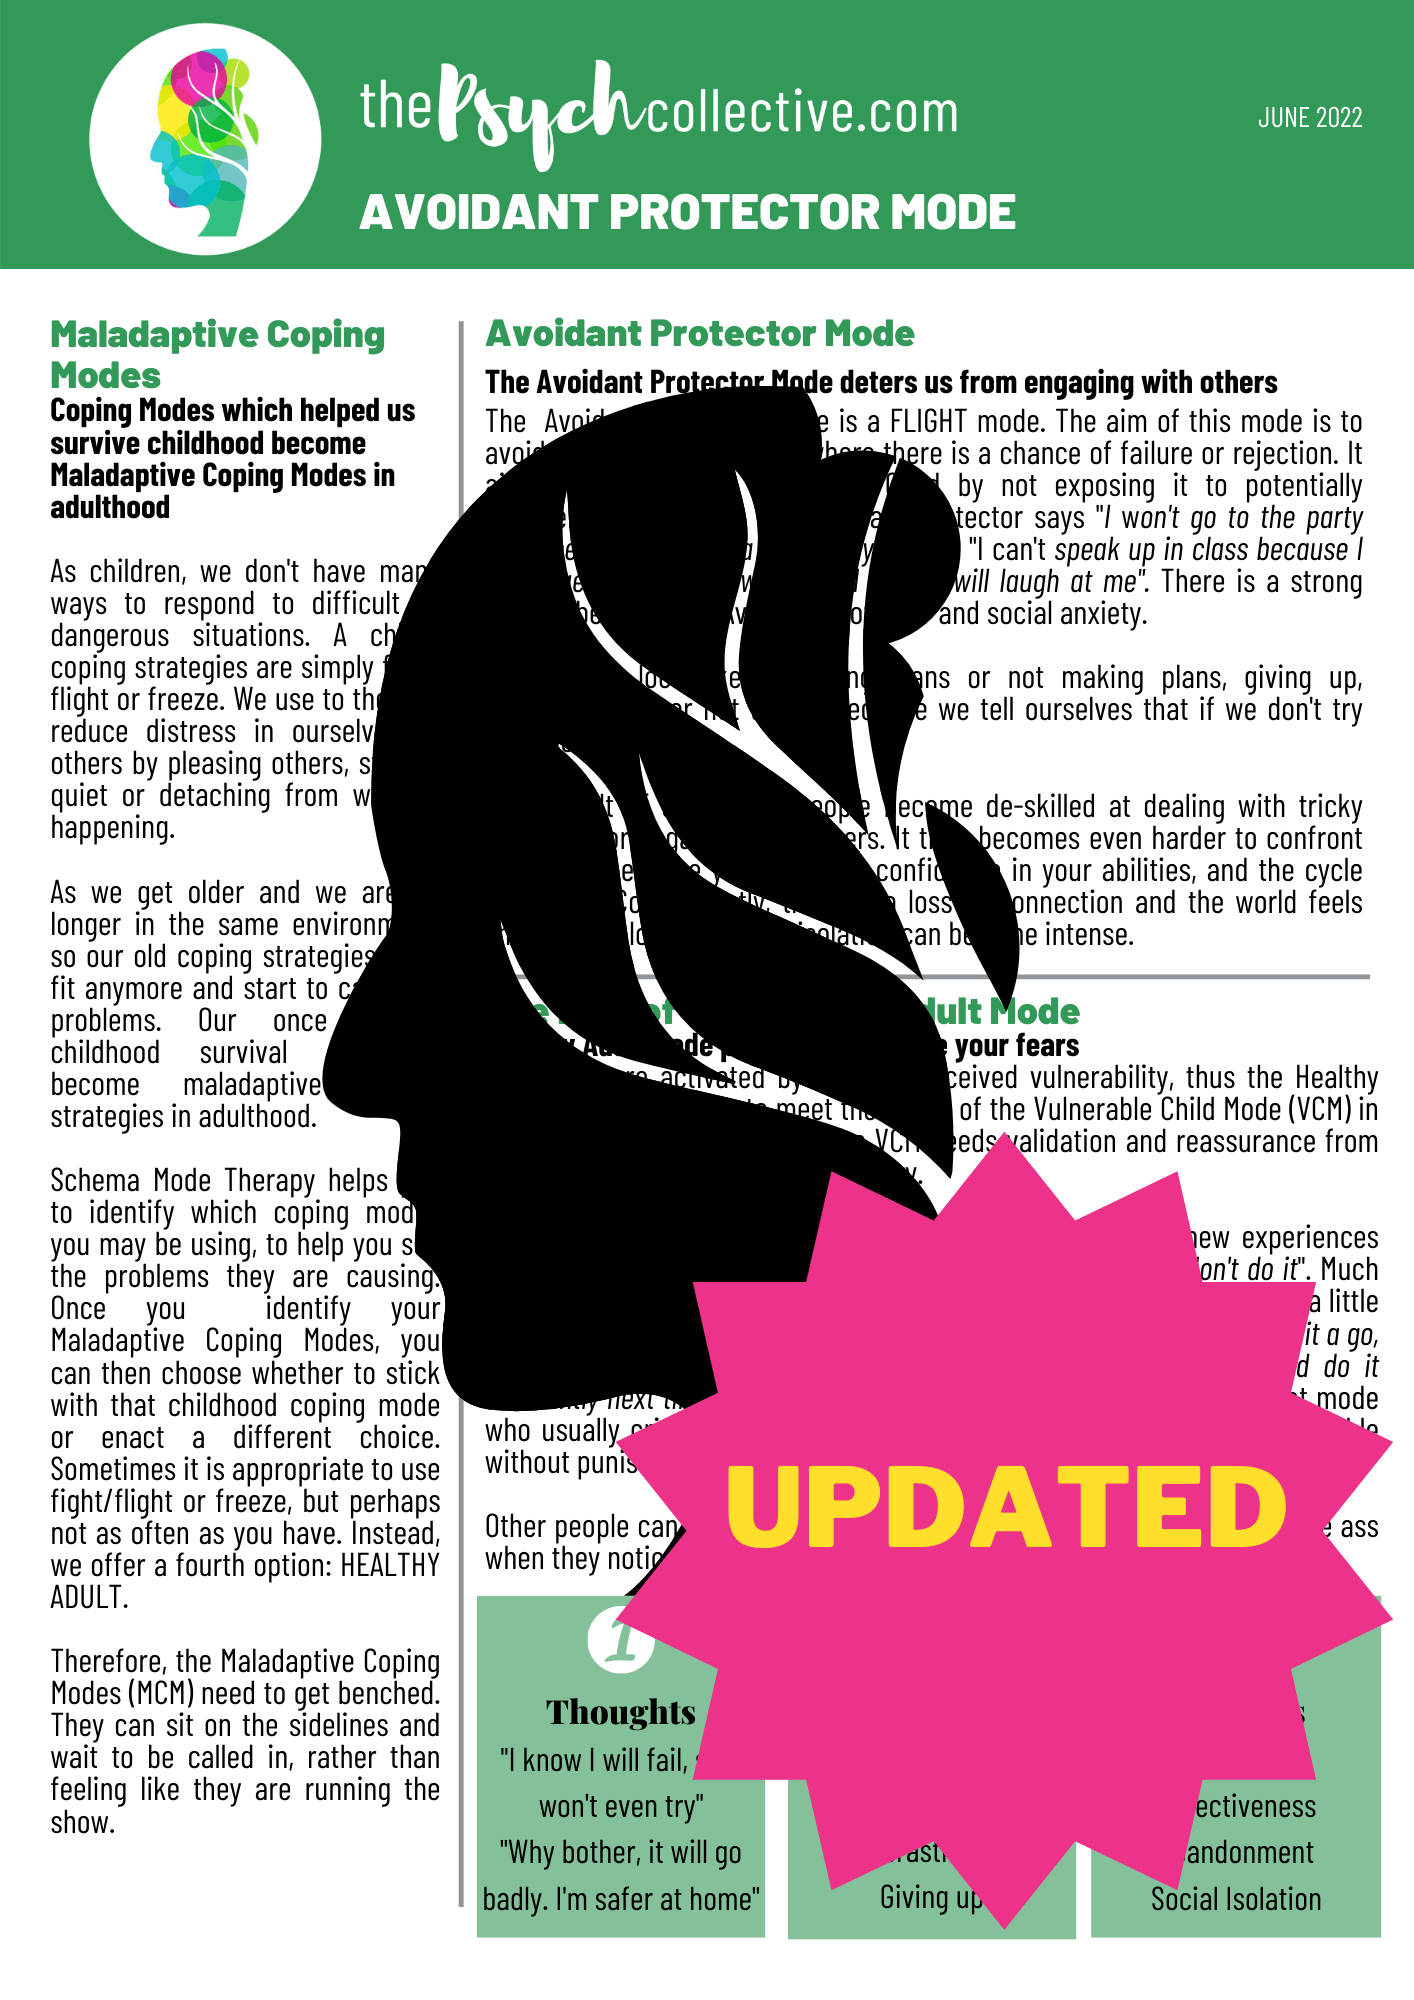 Avoidant Protector Mode - Schema Handout from The Psych Collective